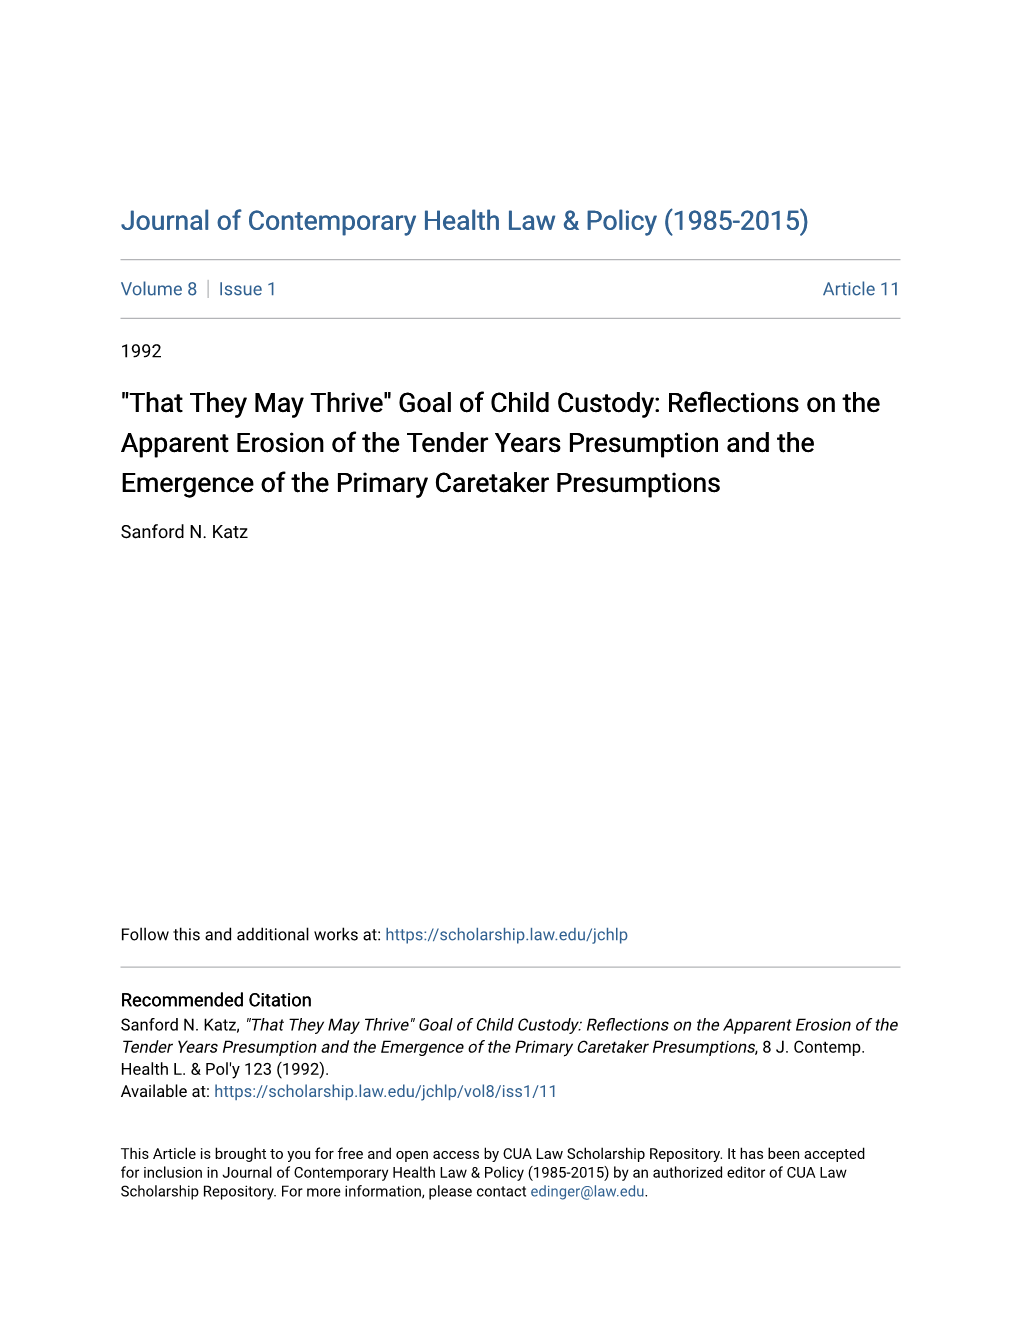 Goal of Child Custody: Reflections on the Apparent Erosion of the Tender Years Presumption and the Emergence of the Primary Caretaker Presumptions